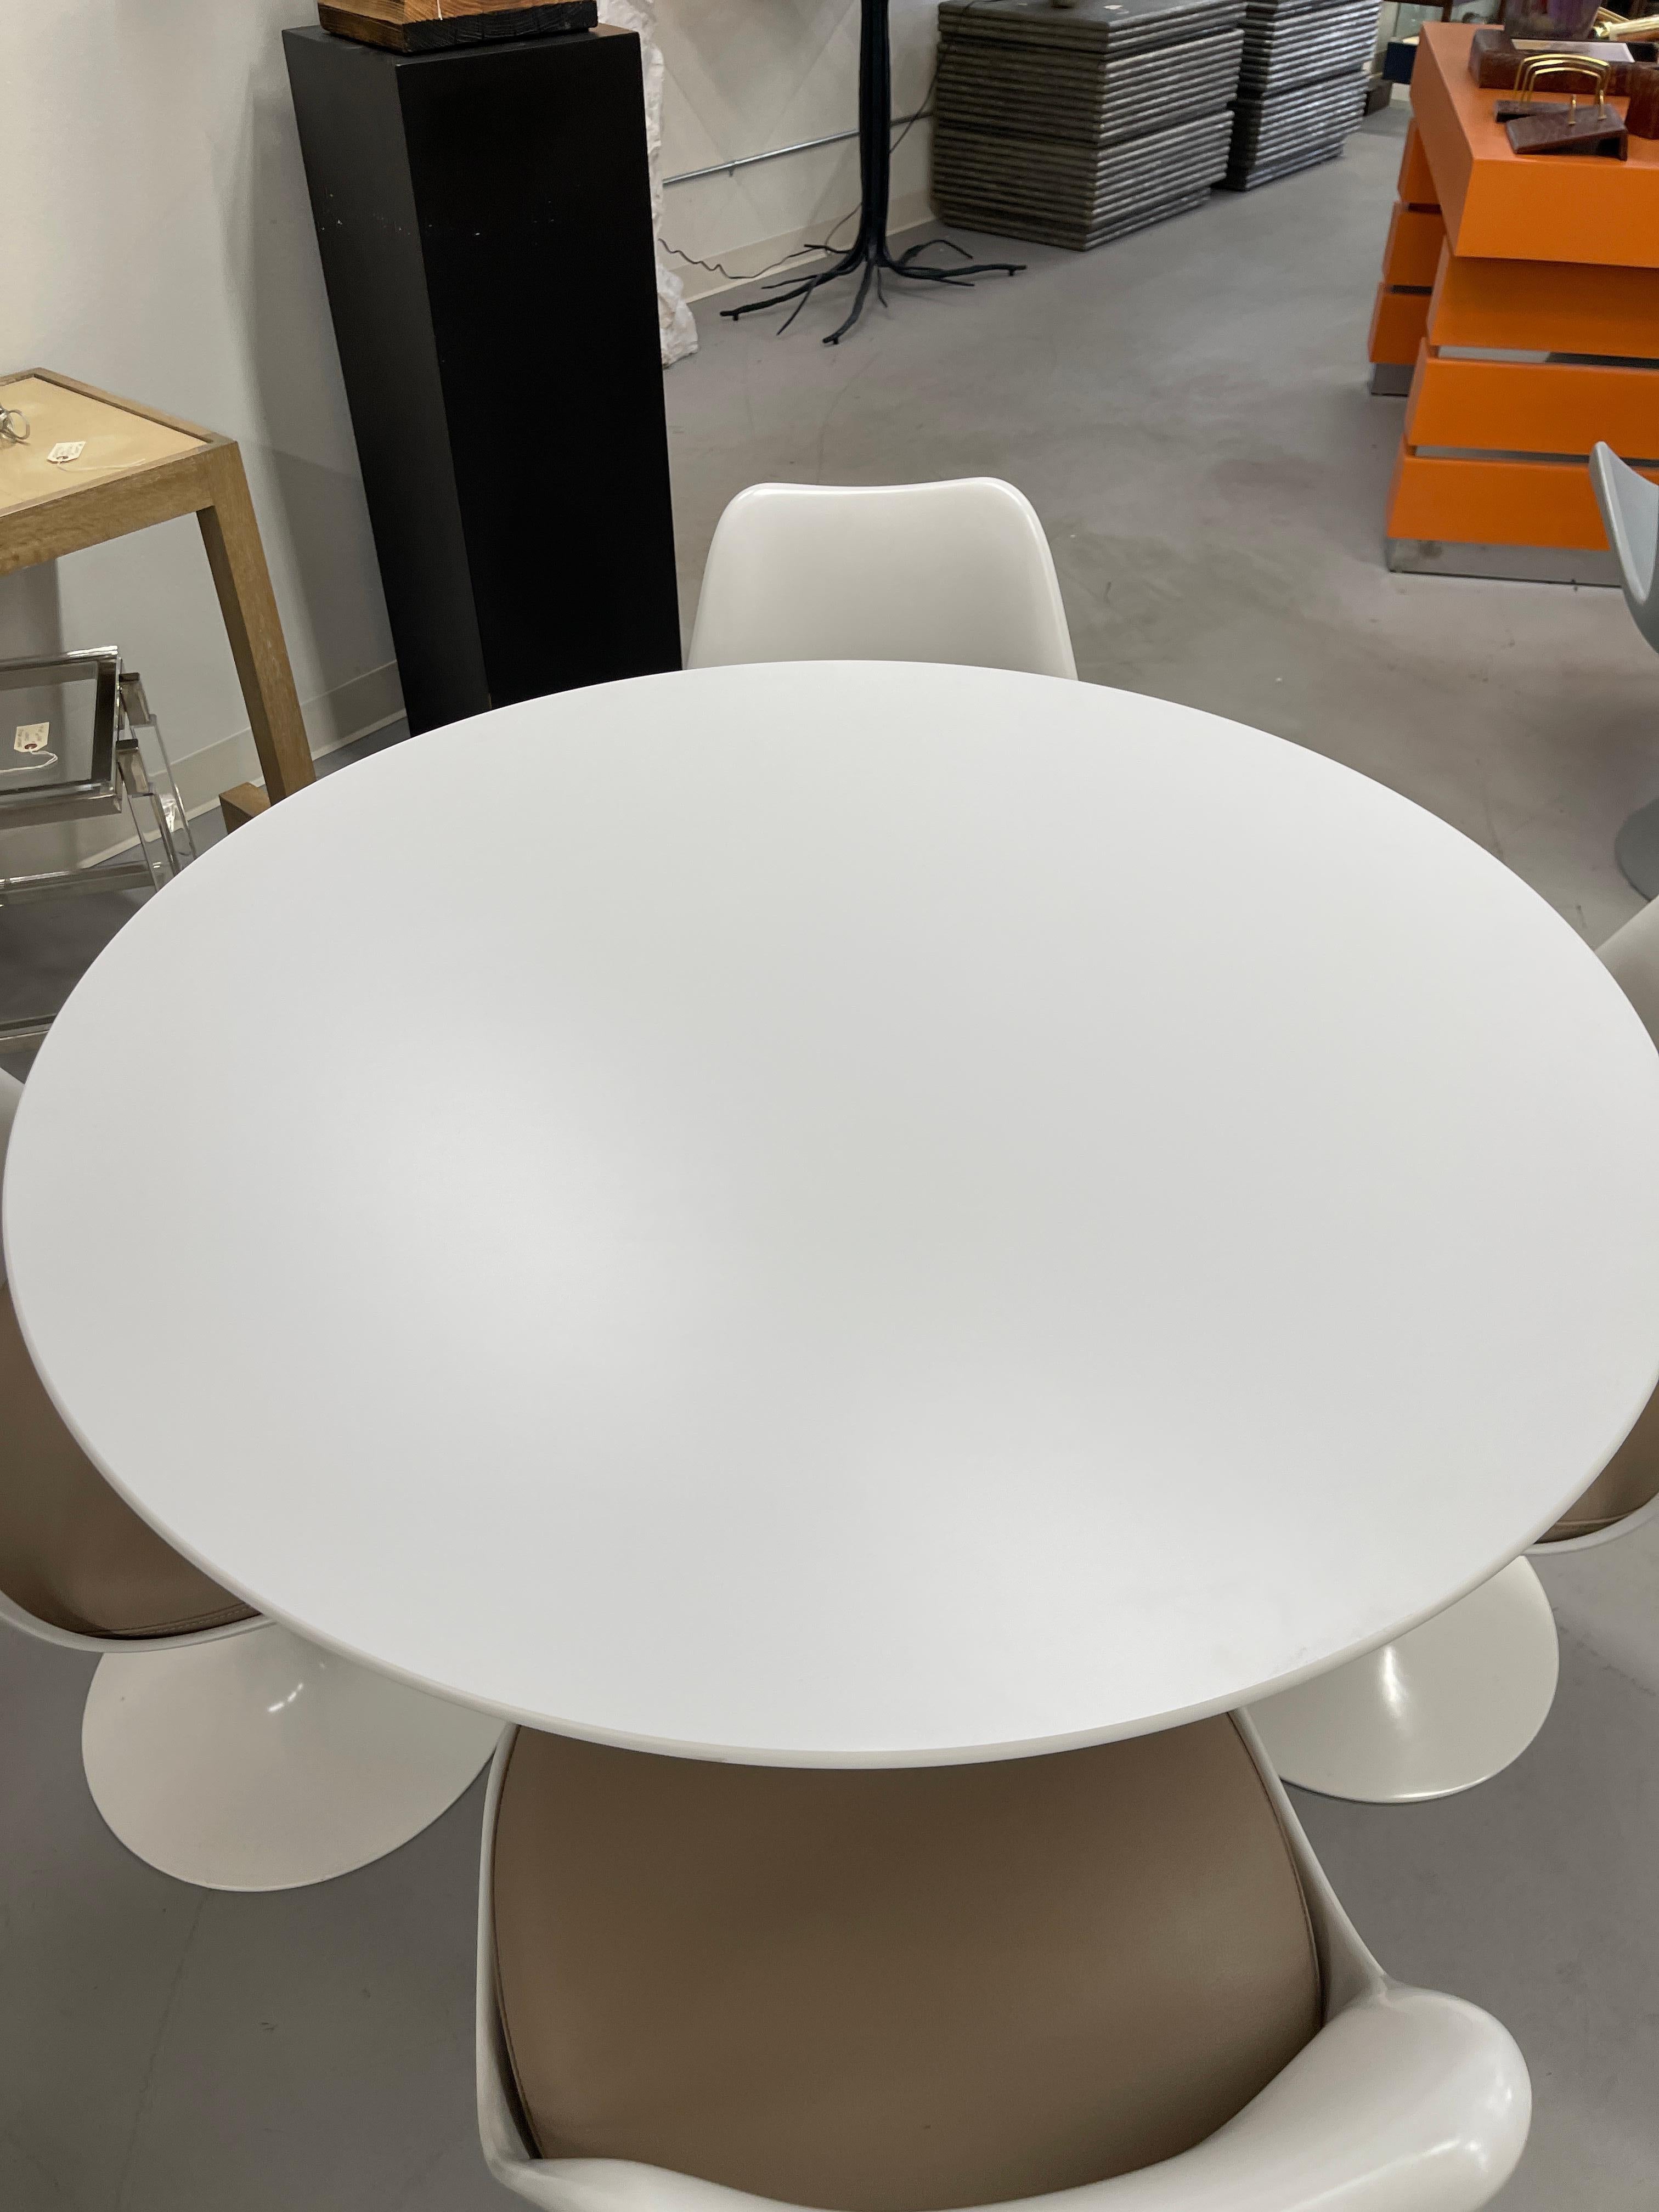 Eero Saarinen for Knoll Tulip Dining Table and Chairs 11